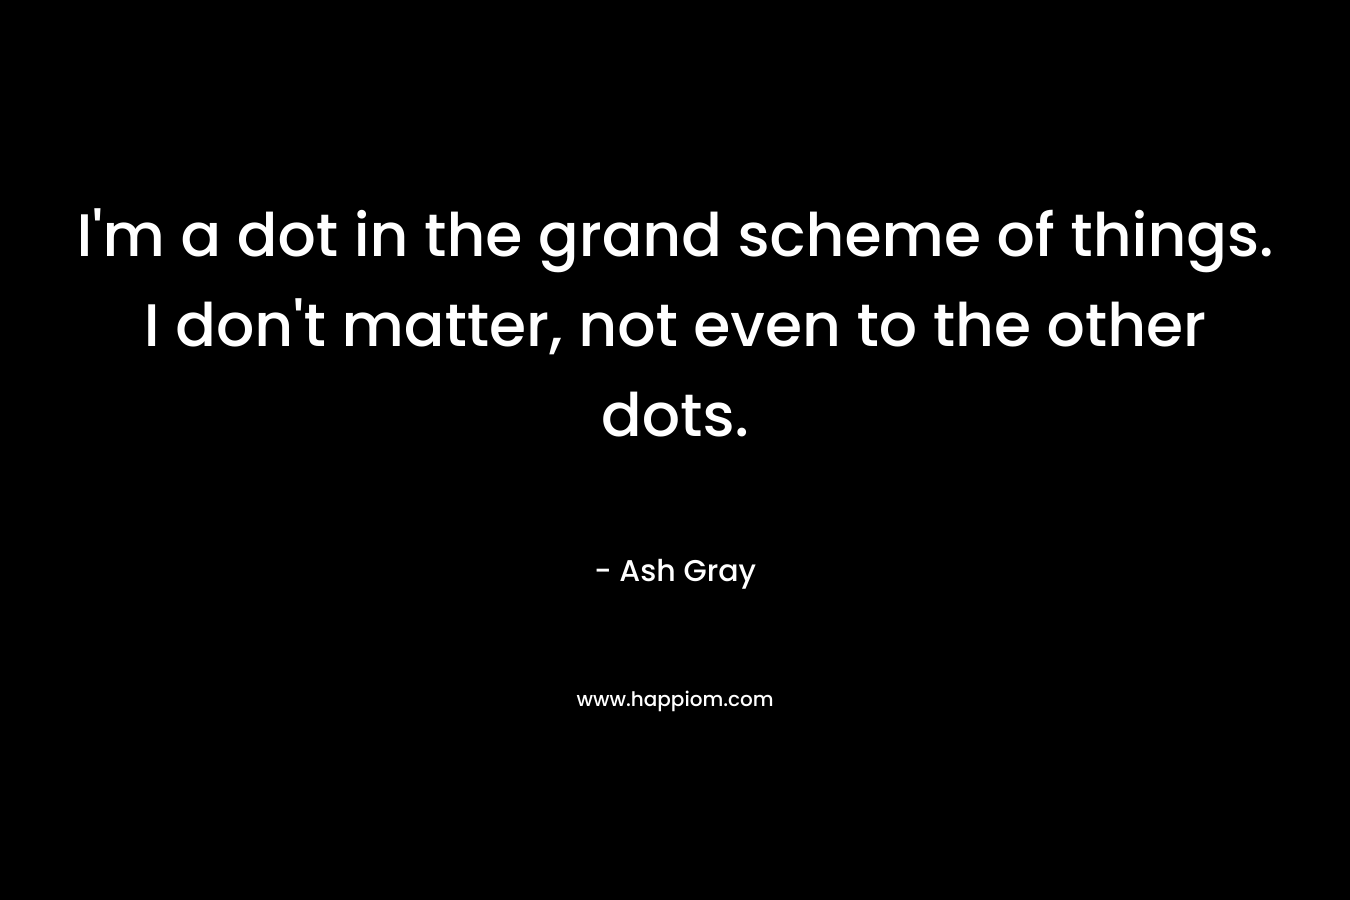 I’m a dot in the grand scheme of things. I don’t matter, not even to the other dots. – Ash Gray